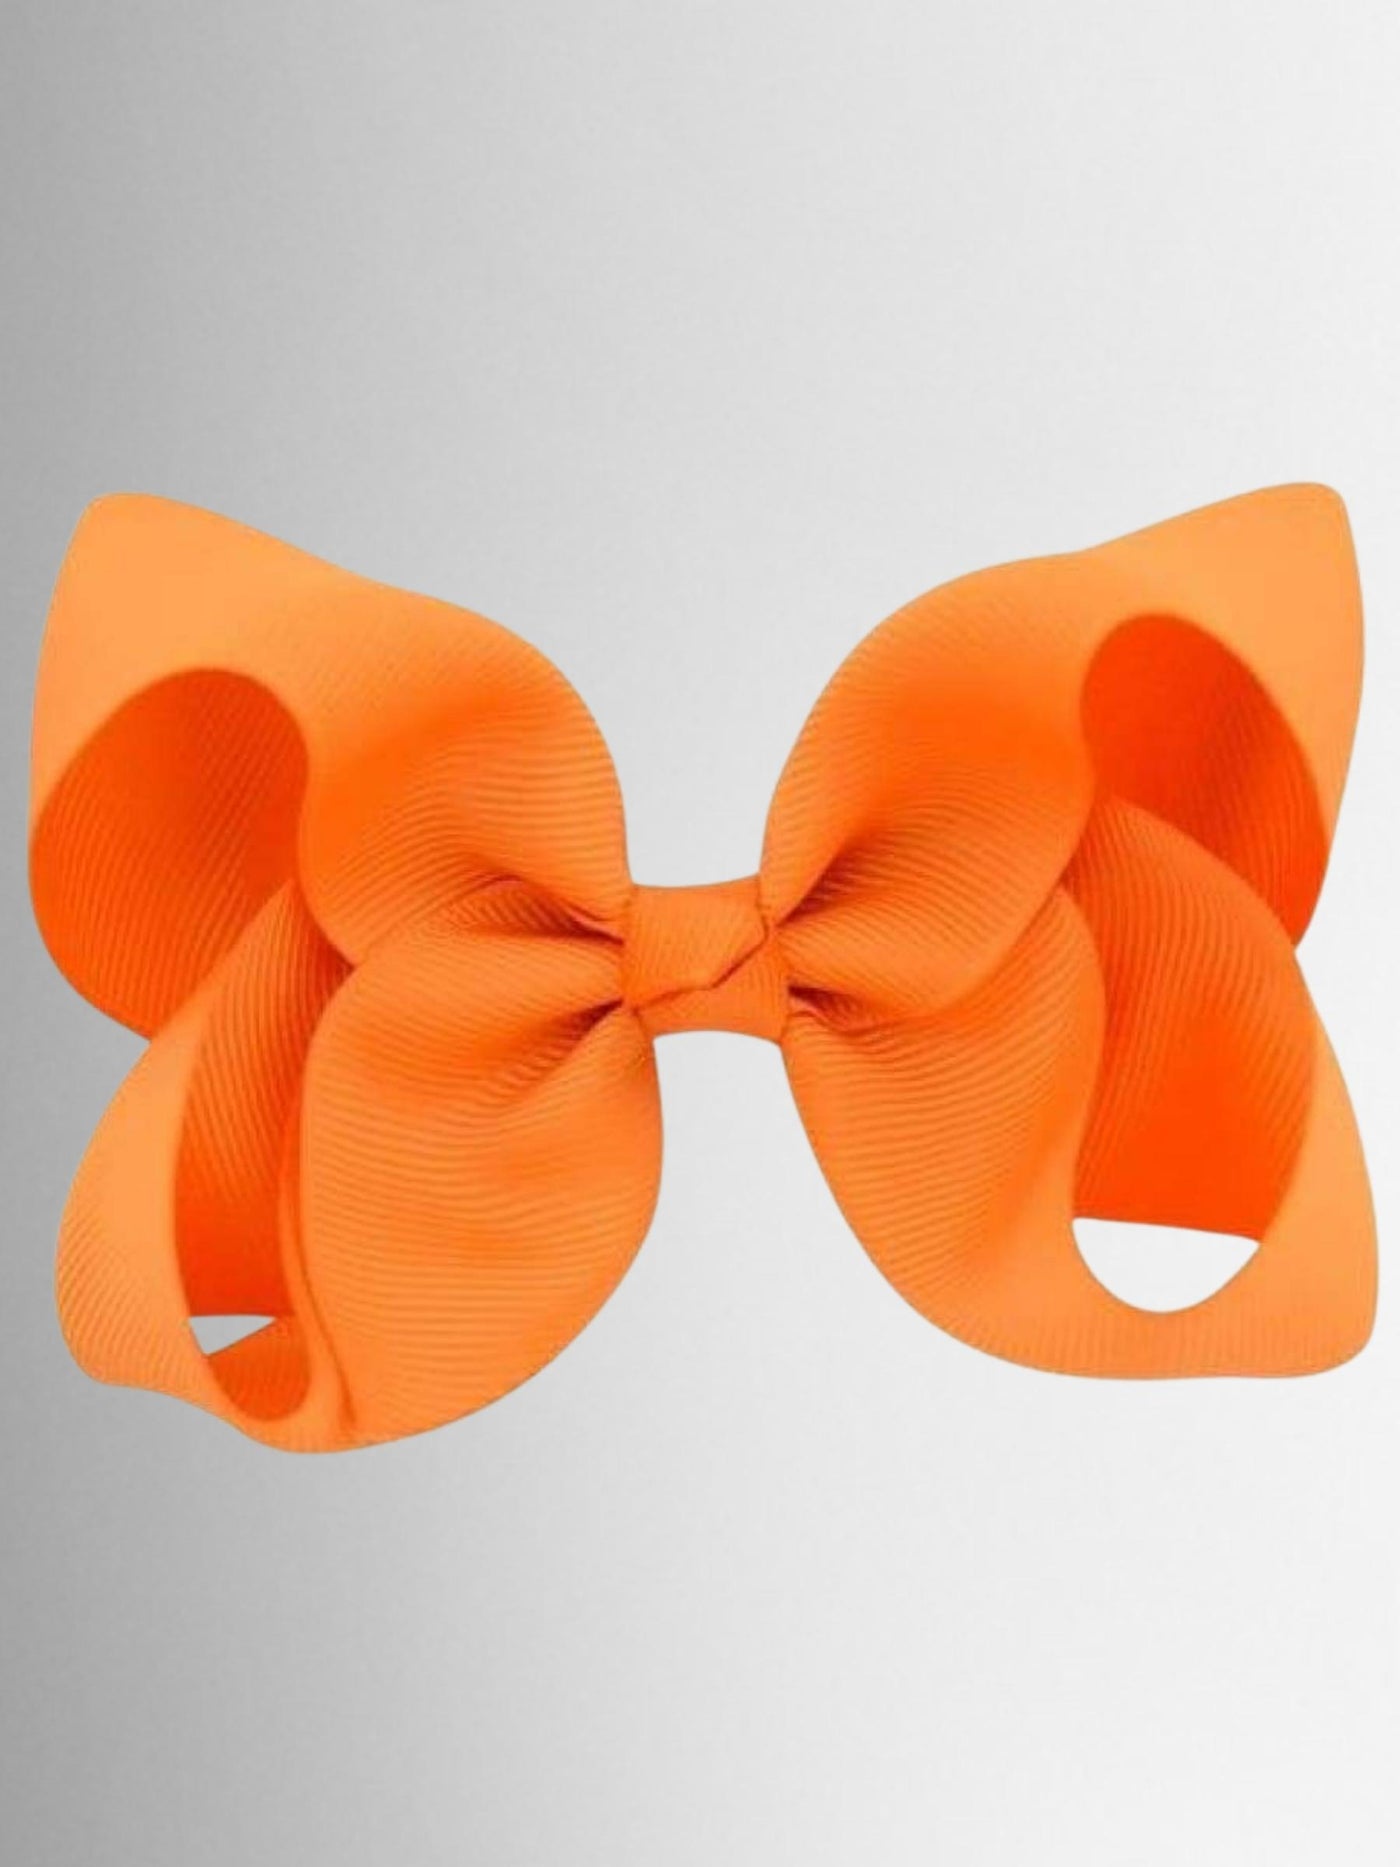 Mia Belle Girls Colored Hair Bow Clips | Girls Accessories